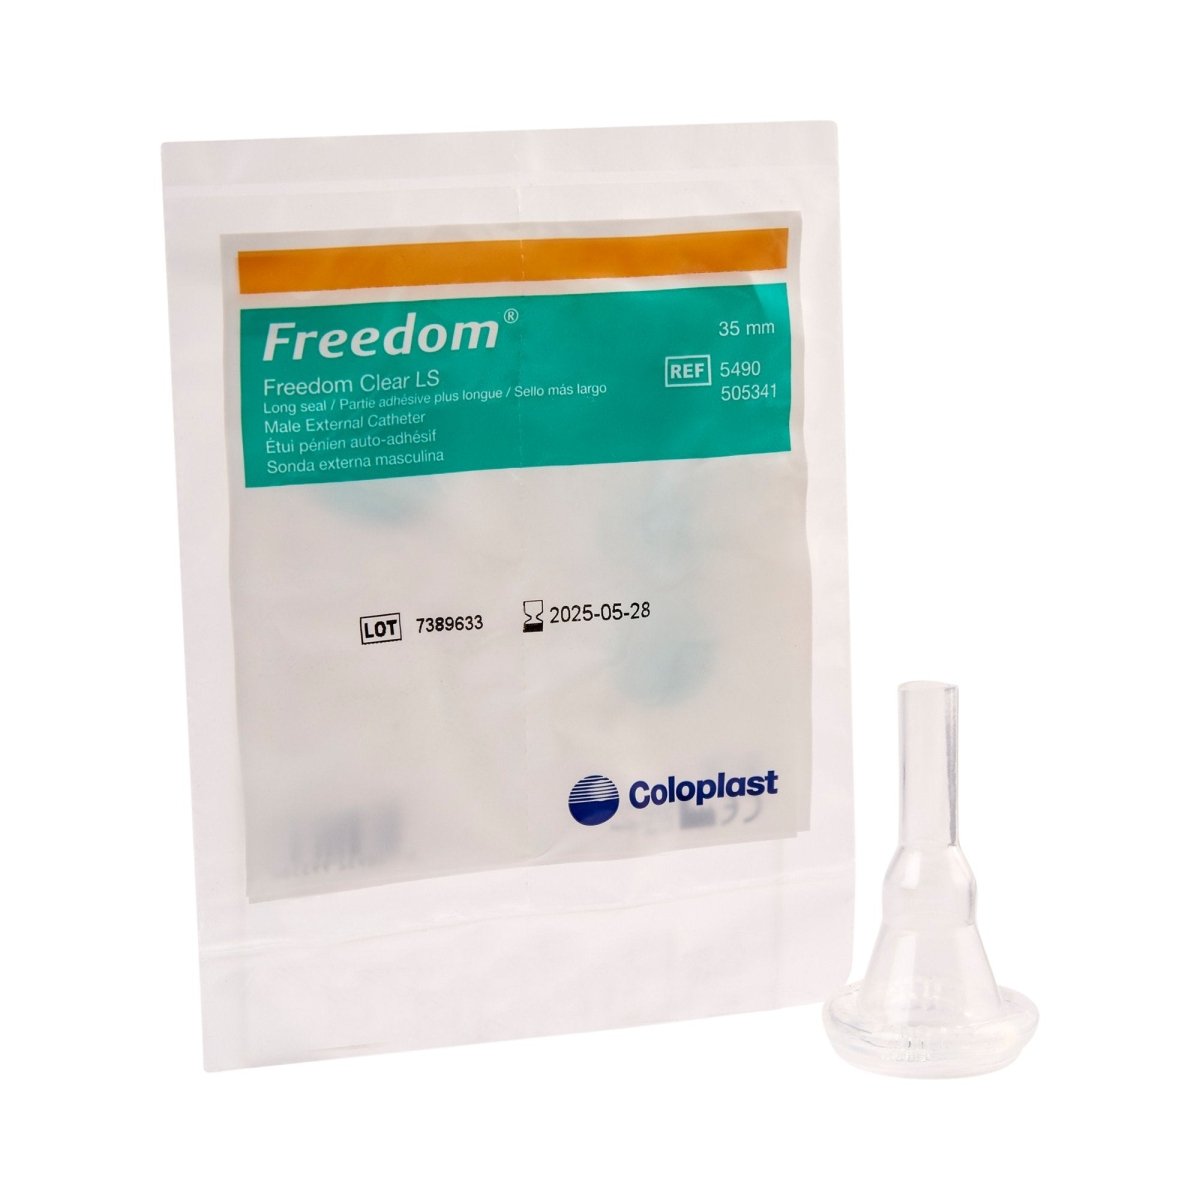 Coloplast Freedom Clear Ls Male External Catheter - 480672_BX - 1